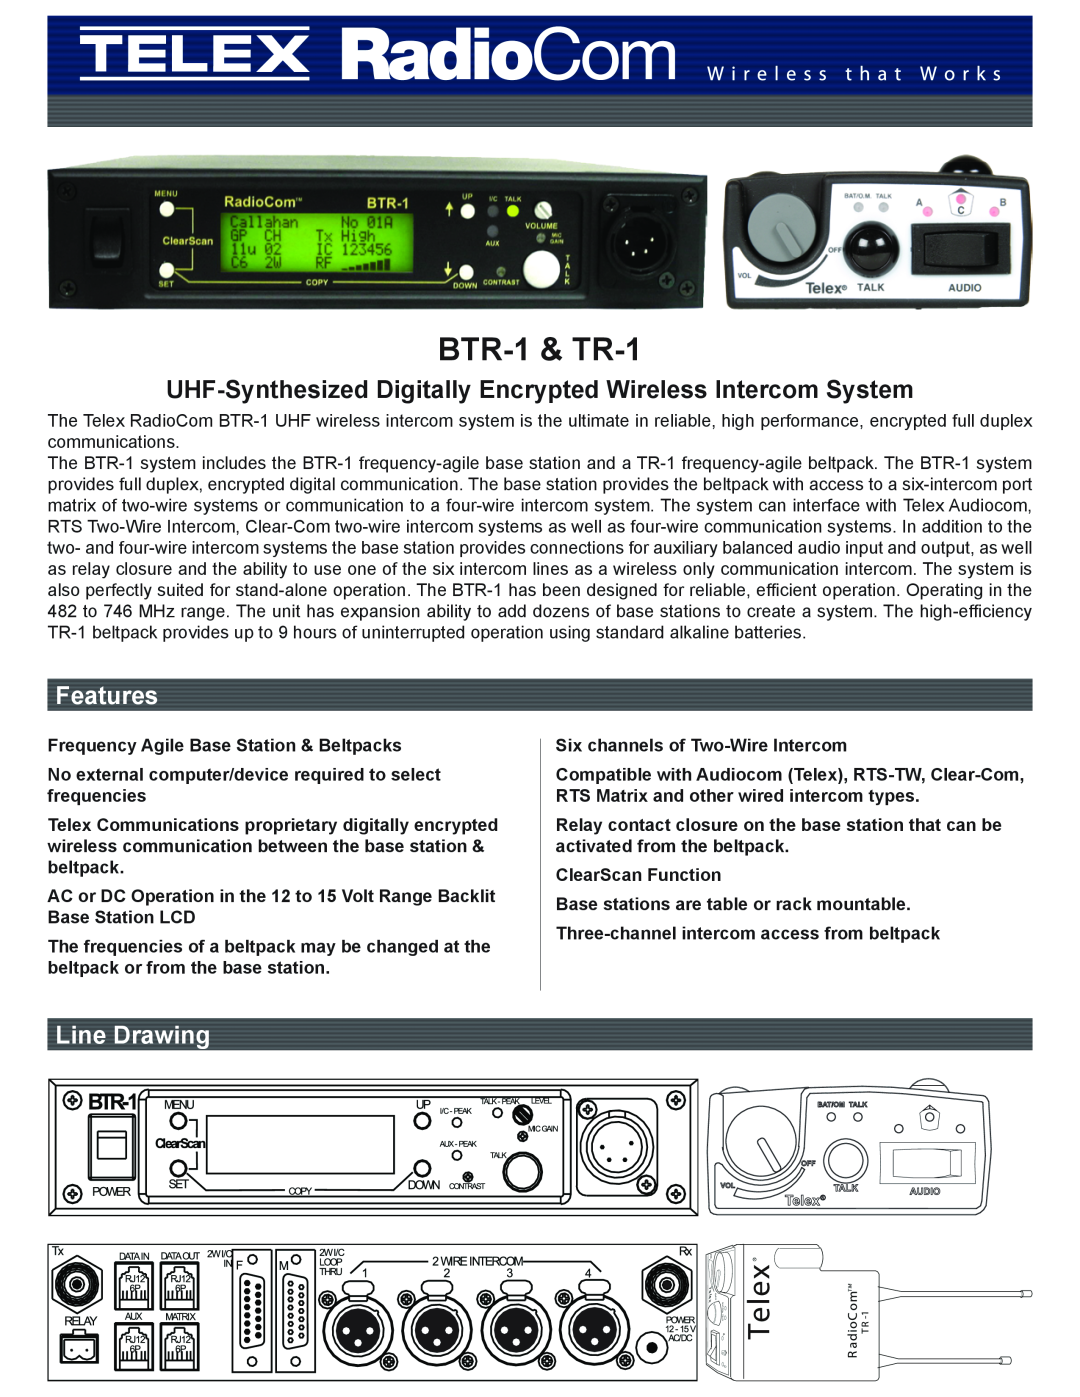 Telex manual BTR-1 & TR-1, UHF-Synthesized Digitally Encrypted Wireless Intercom System, Features, Line Drawing 